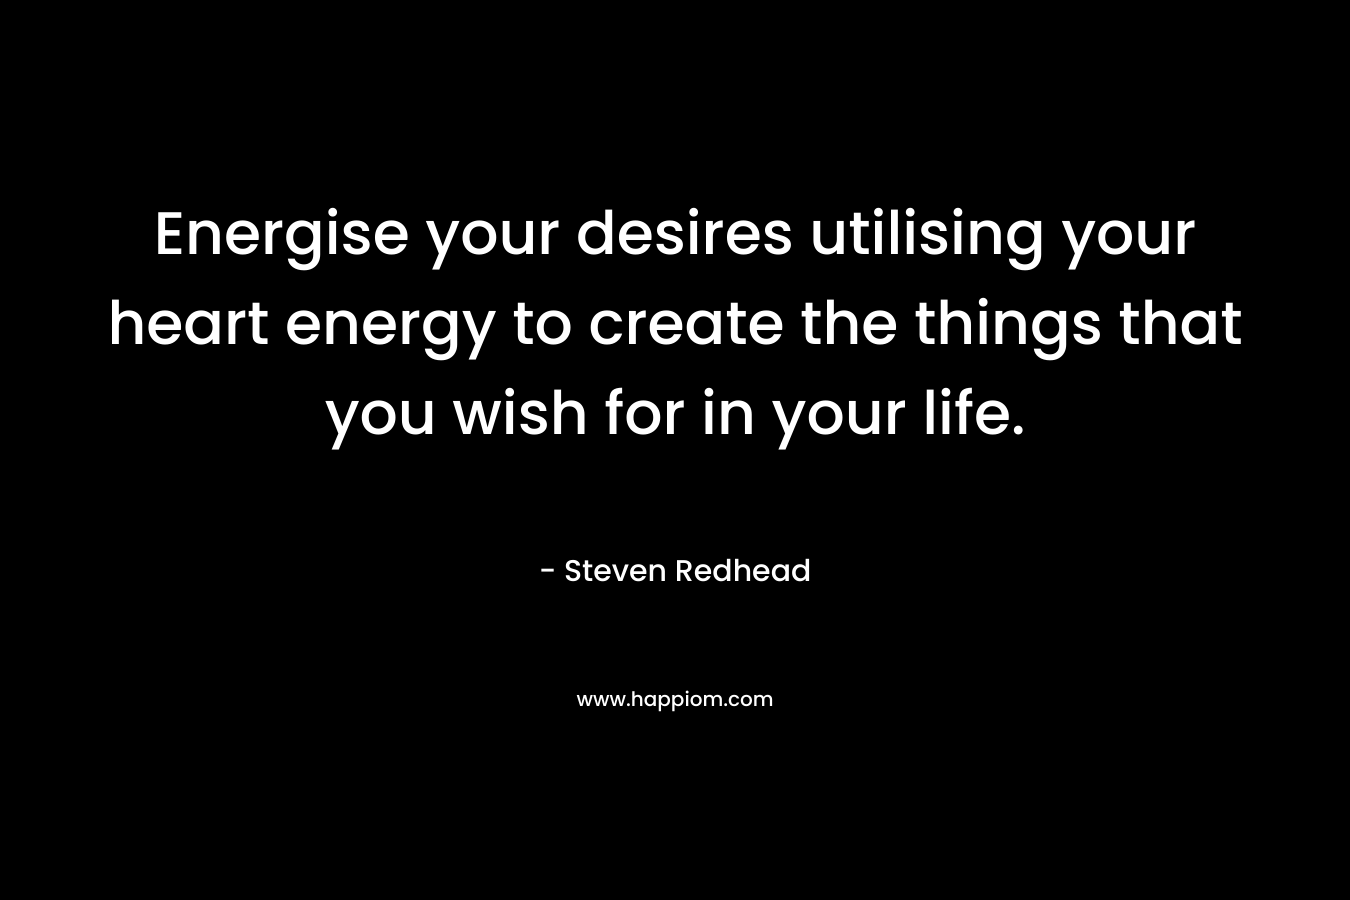 Energise your desires utilising your heart energy to create the things that you wish for in your life.